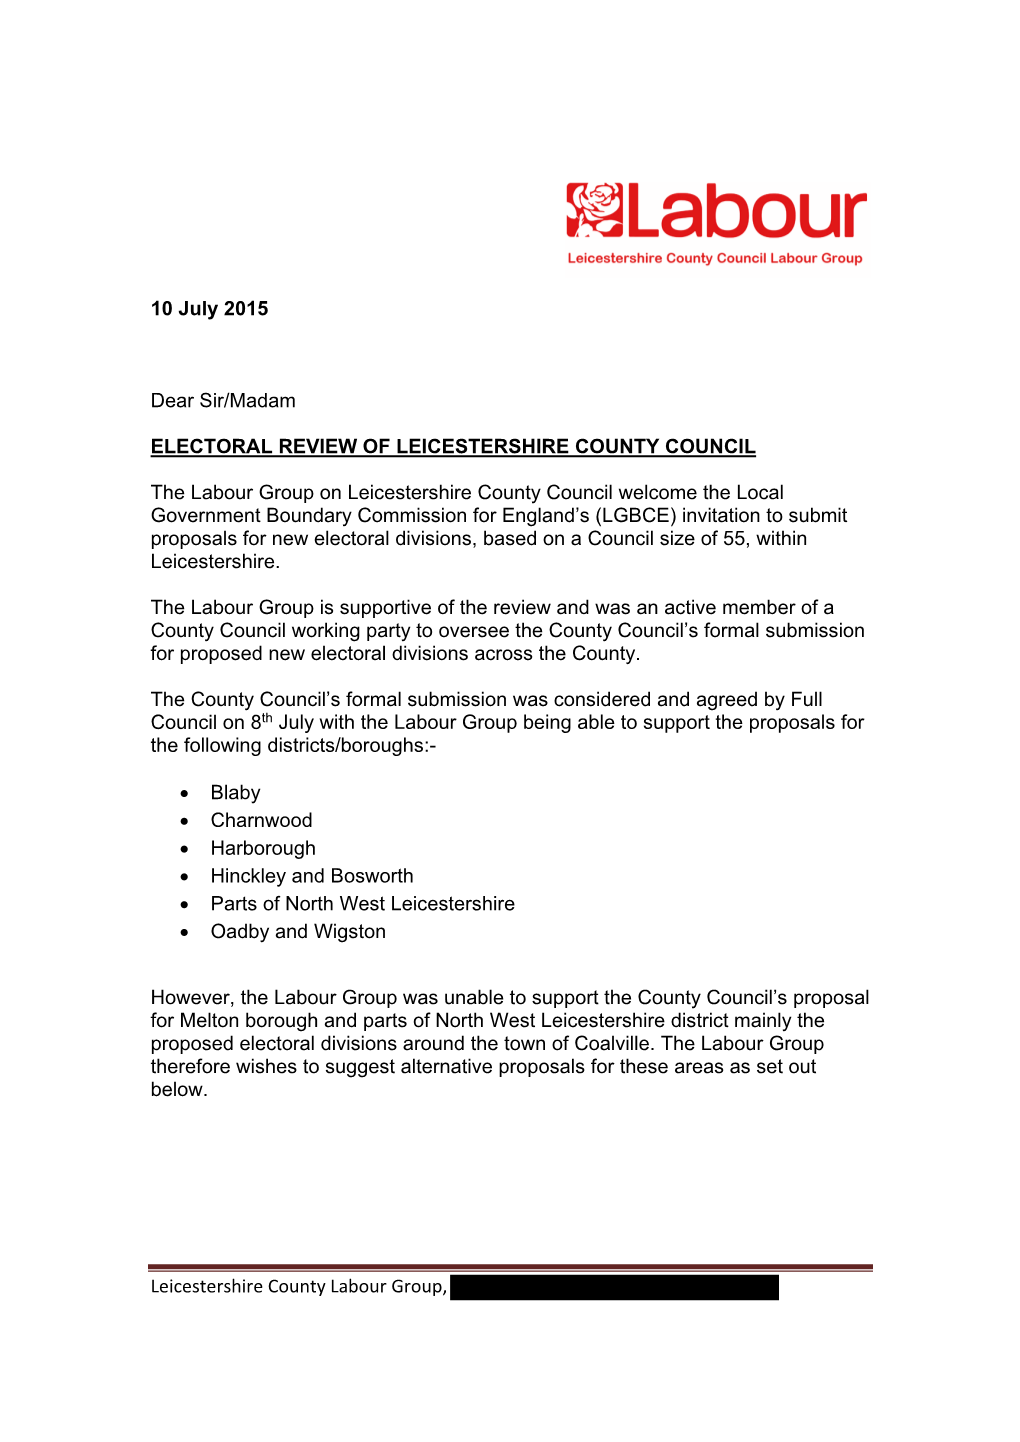 Leicestershire County Labour Group, 10 July 2015 Dear Sir/Madam